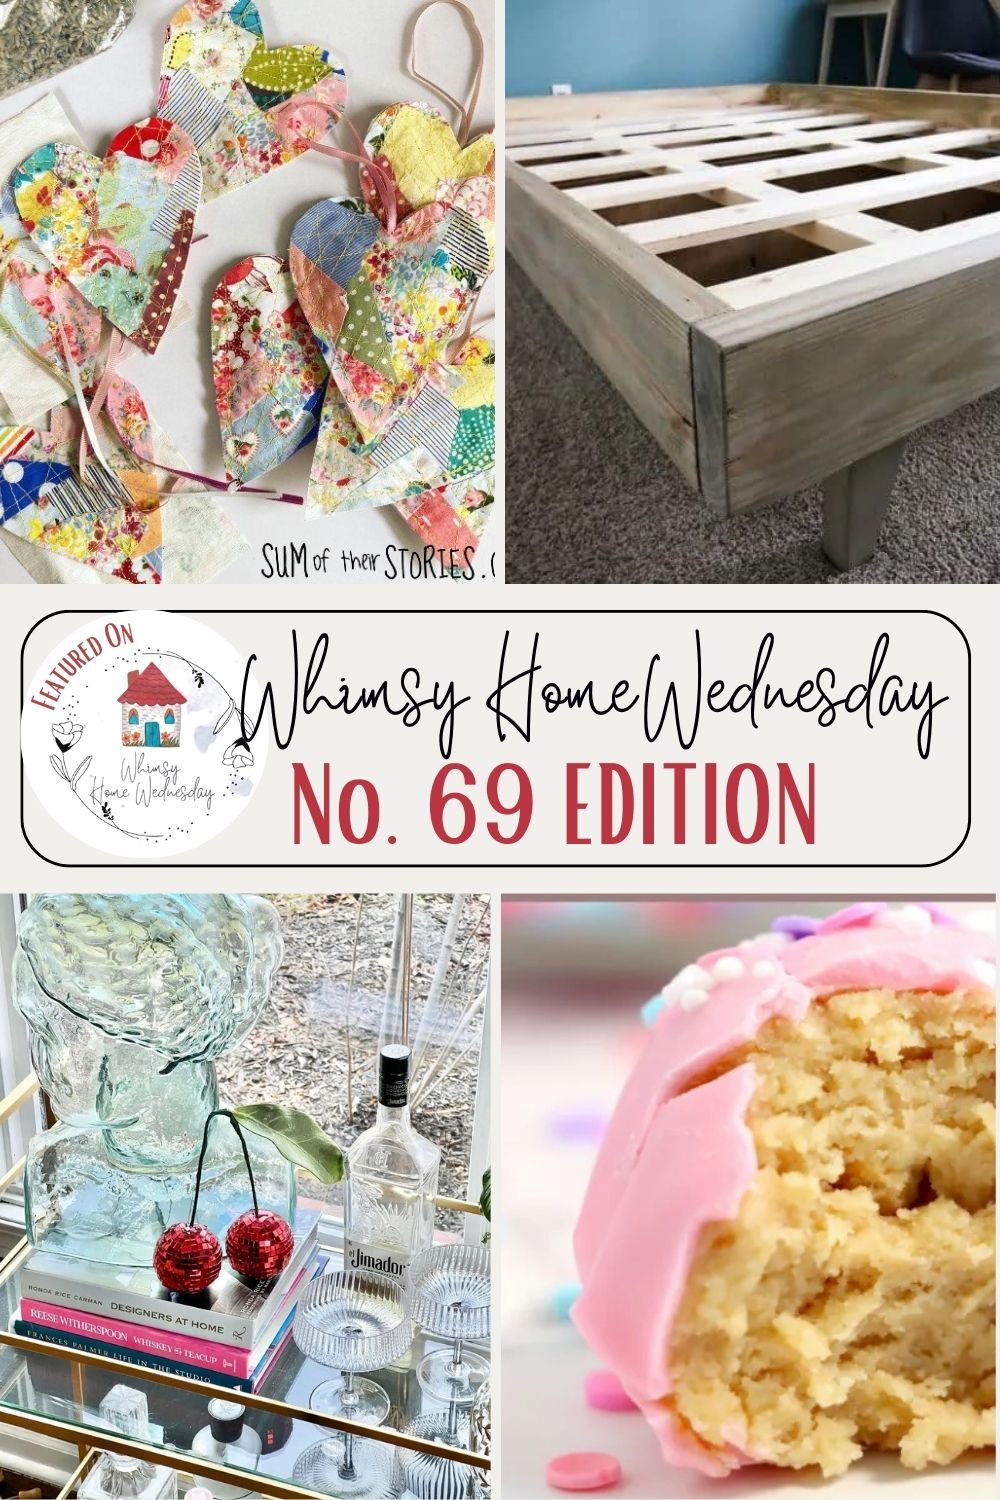 Join us on Whimsy Home Wednesday Blog Link Party No. 69 and see host projects, the features from the previous week and link up your posts!